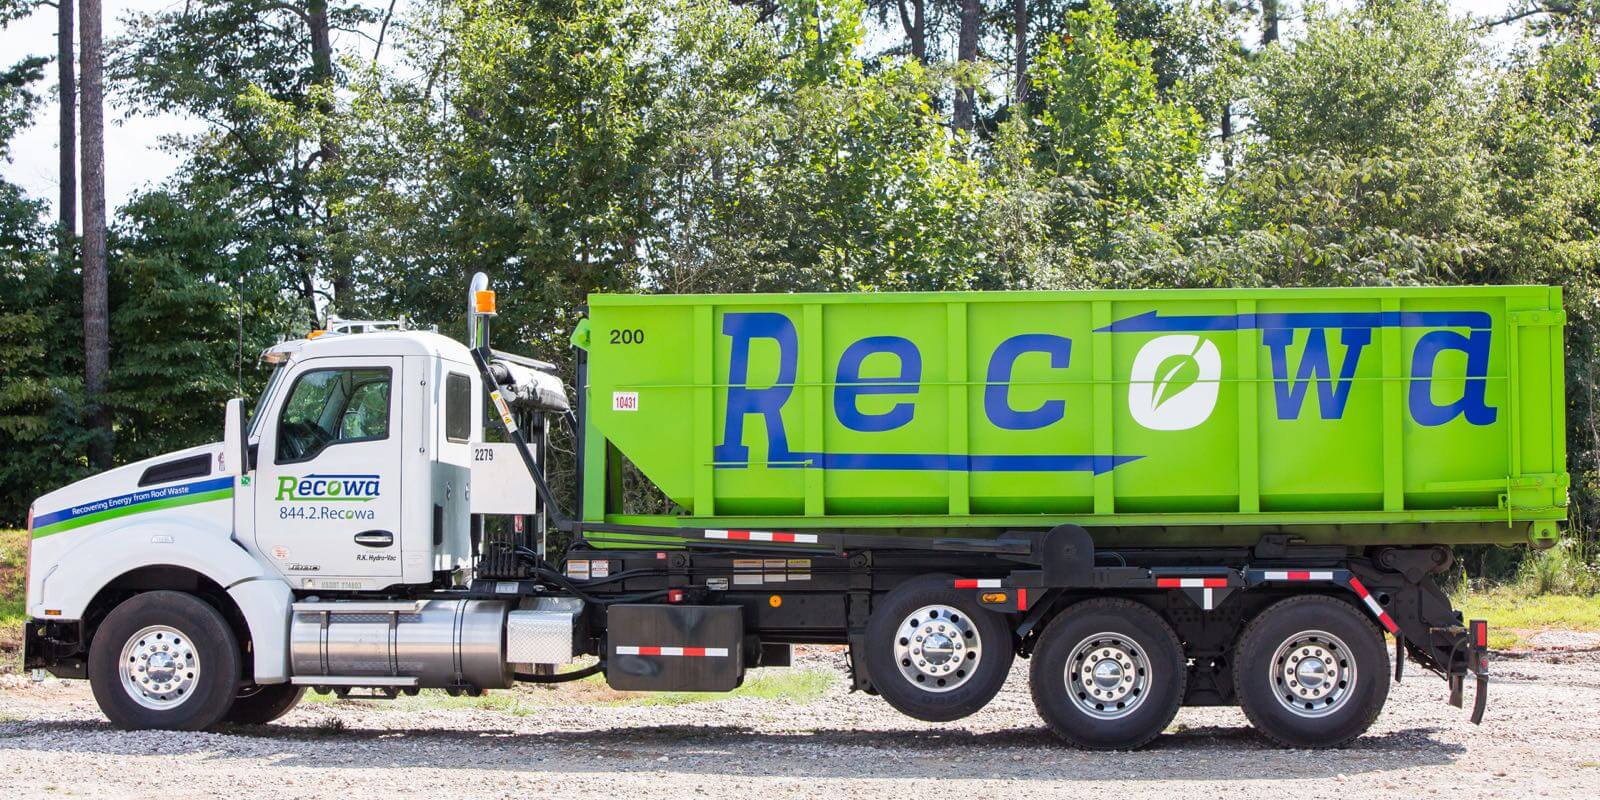 Recowa Roof Waste Removal Truck